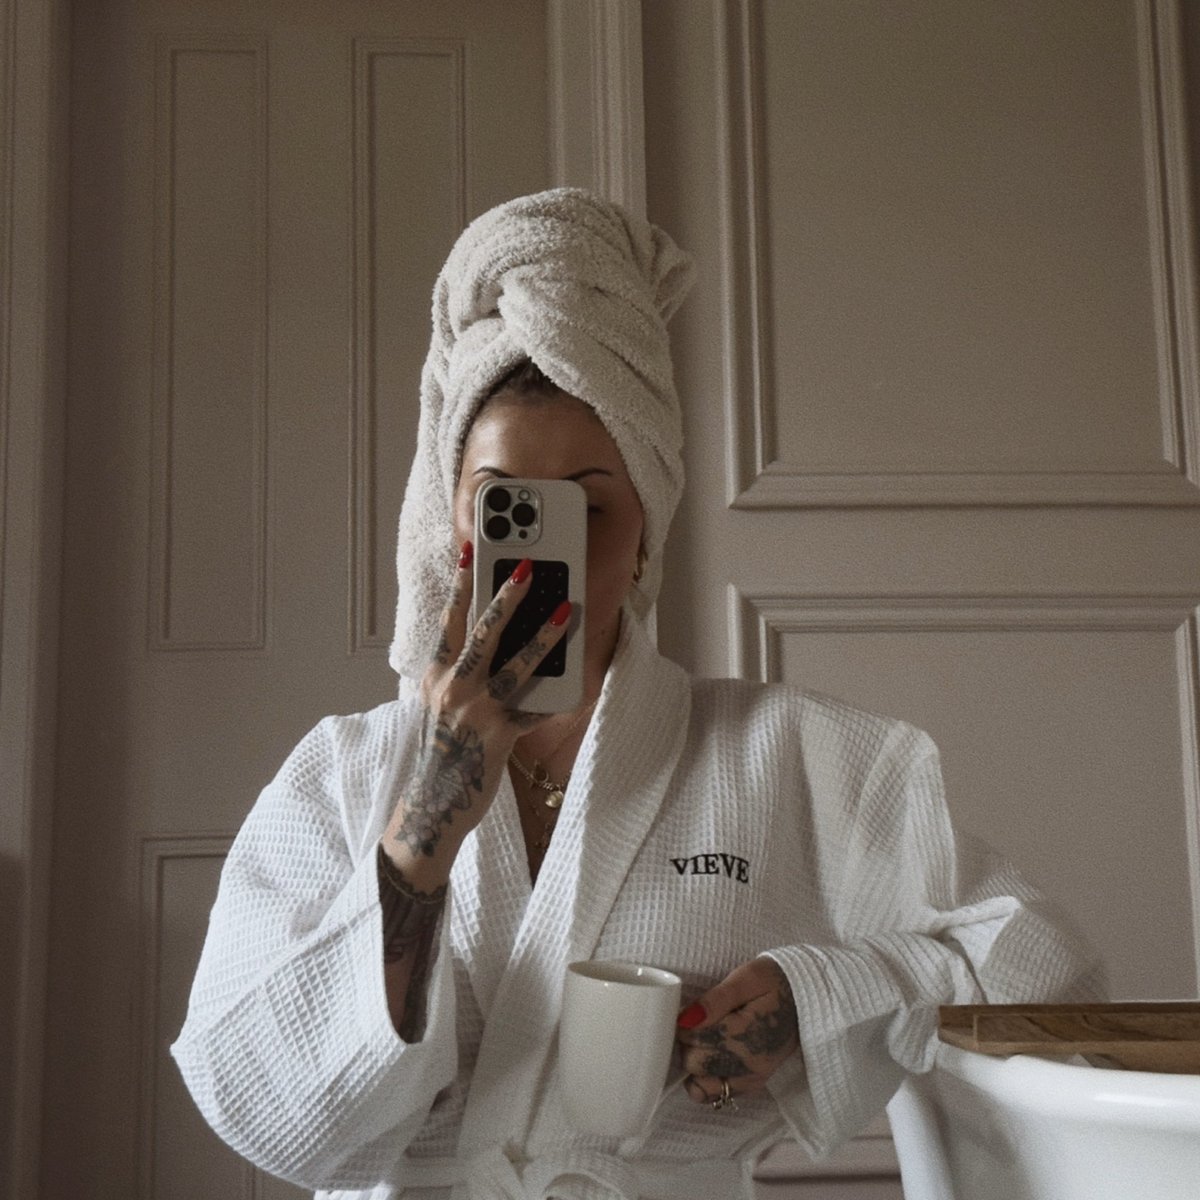 Get the spa experience at home with the VIEVE Robe. With a comfy oversize fit, waffle texture and pockets (we love pockets...), it’s the ultimate cosy companion whether you’re relaxing on the sofa, indulging in a post-bath self-care ritual or sipping your morning coffee. #VIEVE